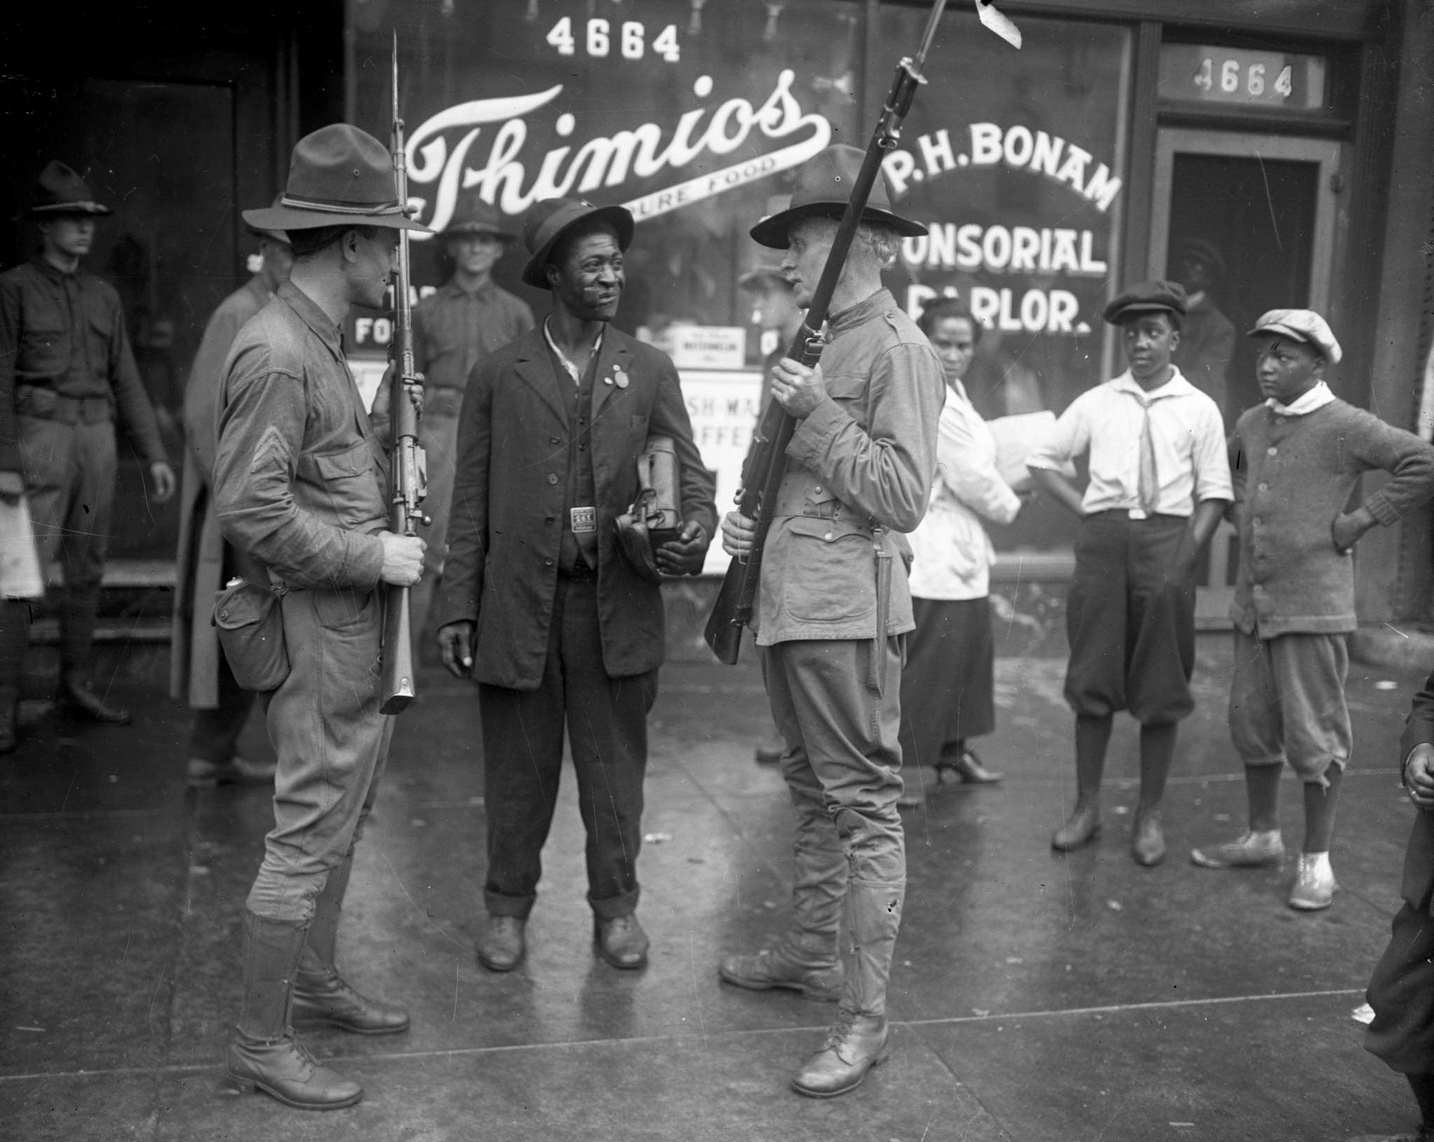 Members of the state militia talk with a man during the Chicago race riots of 1919.